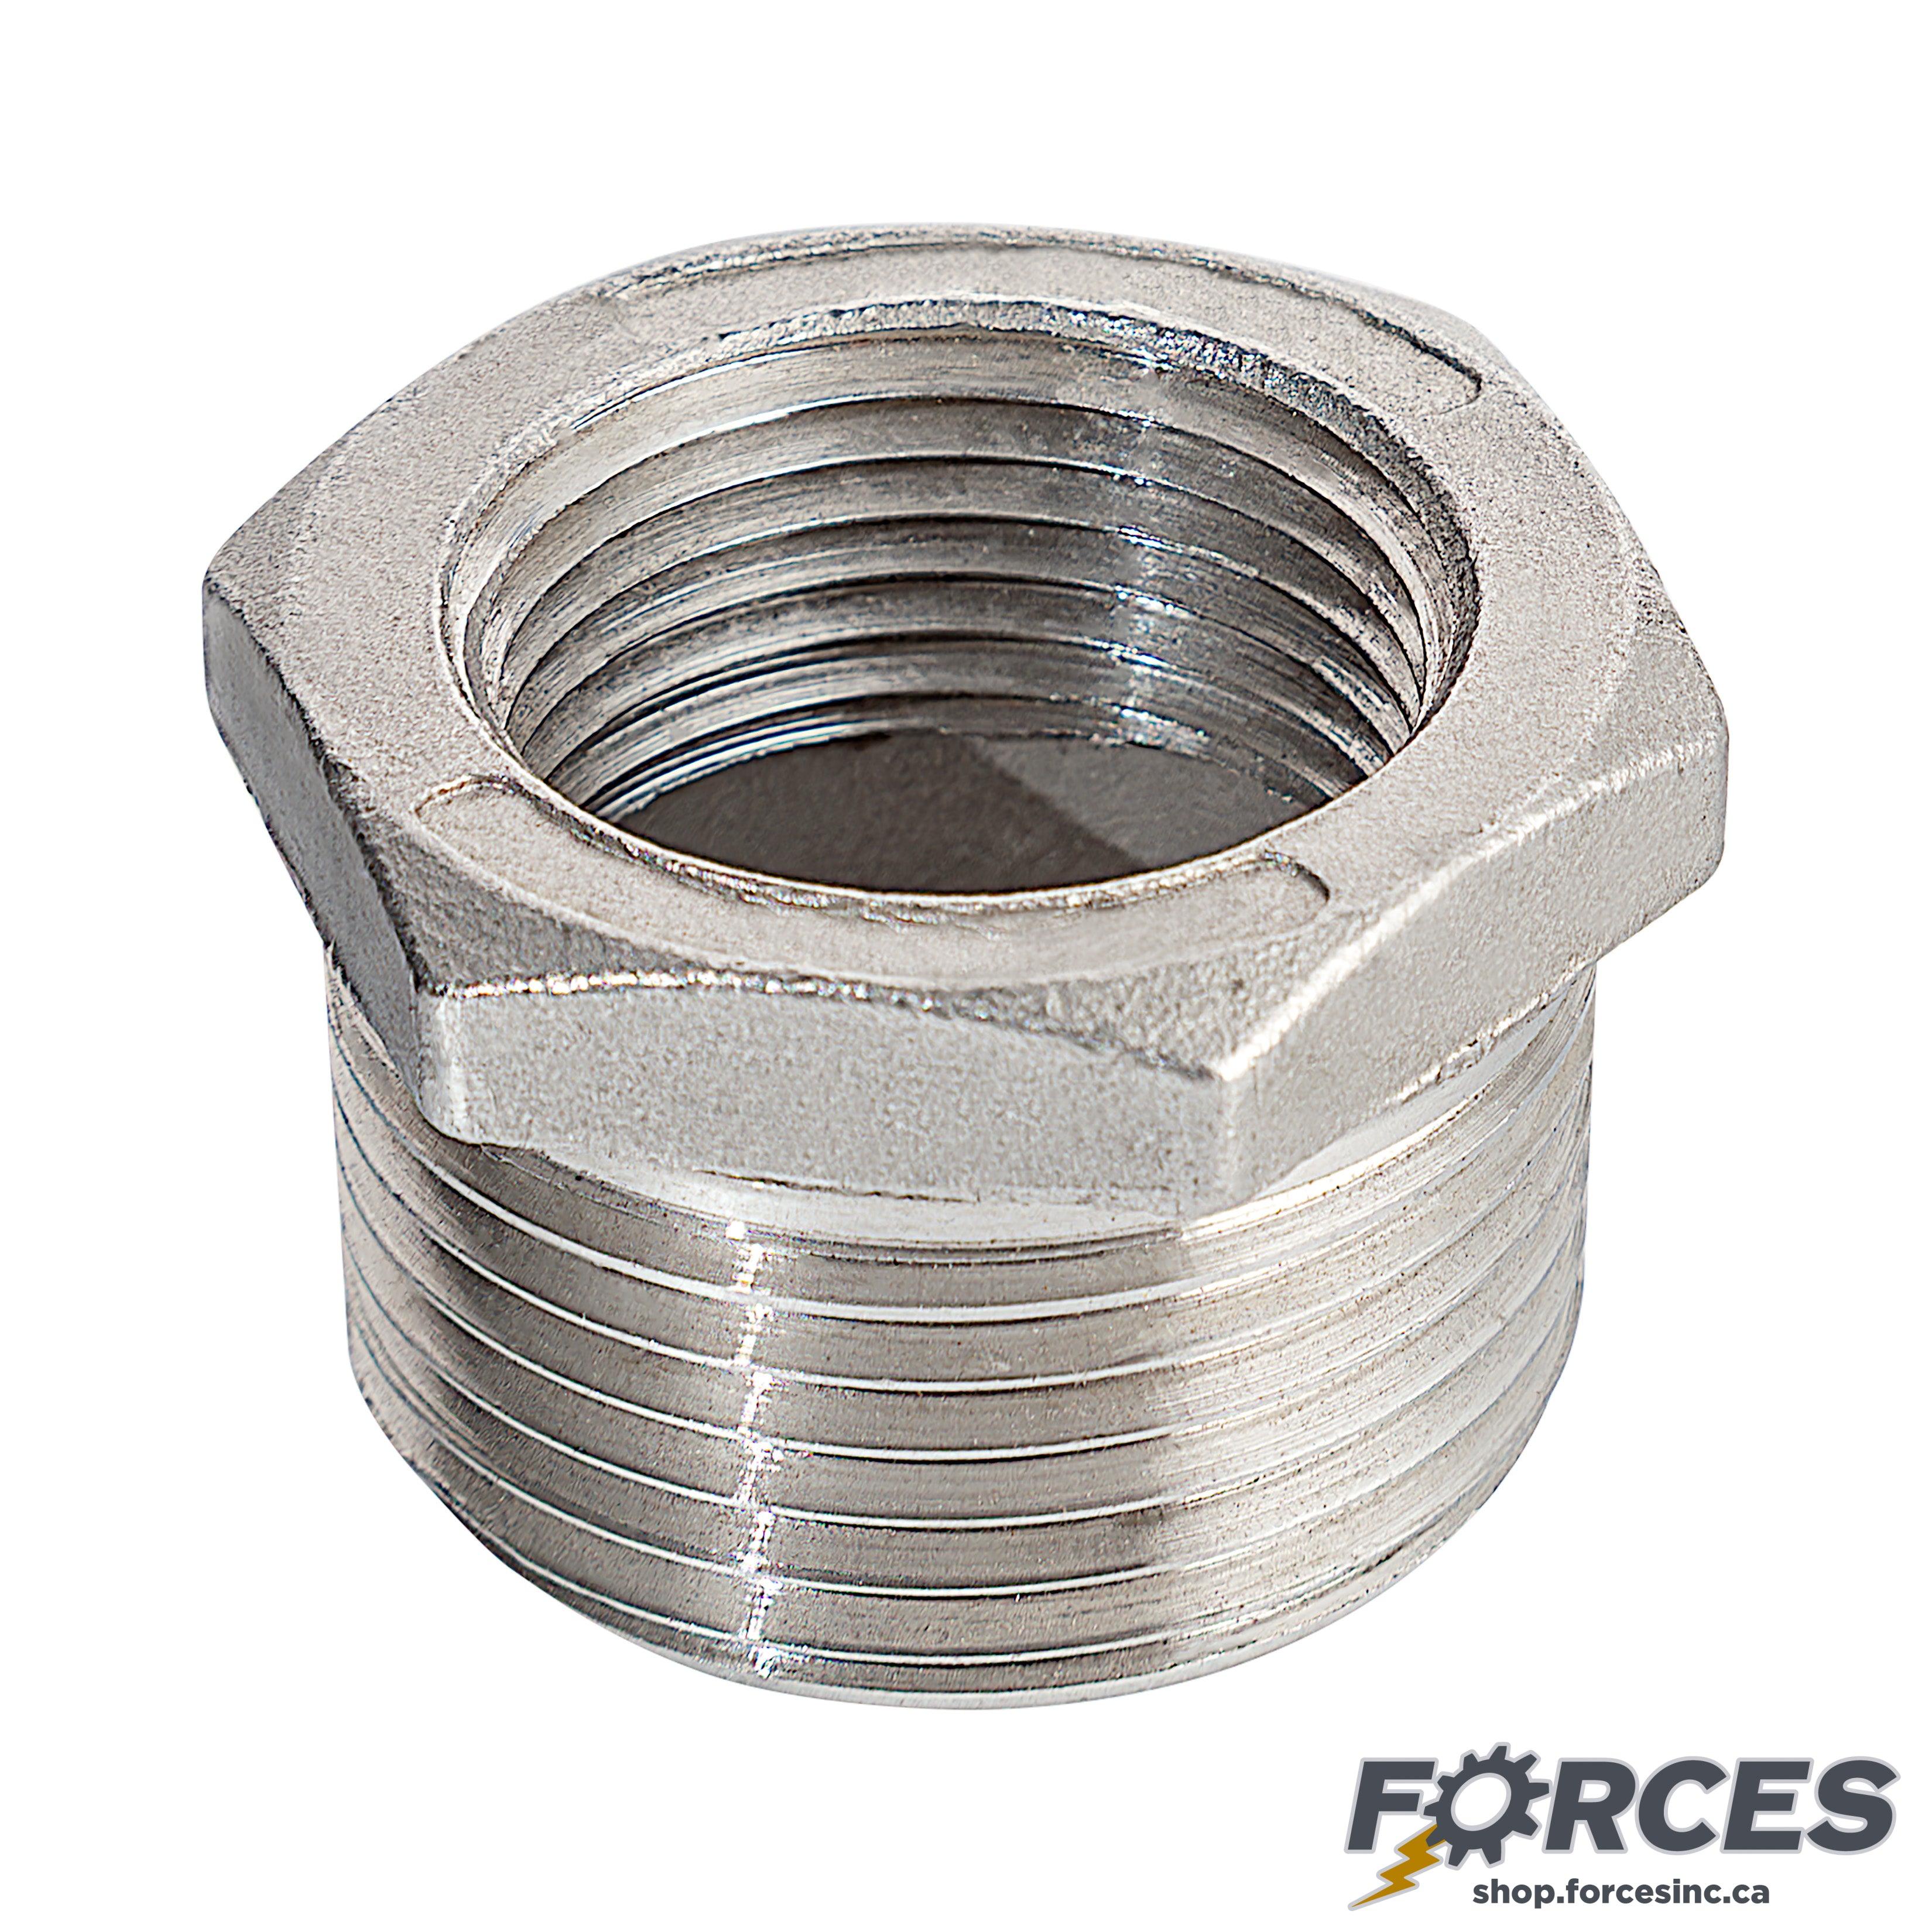 1/2" (M) x 3/8" (F) Reducing Hex Bushing NPT #150 - Stainless Steel 316 - Forces Inc